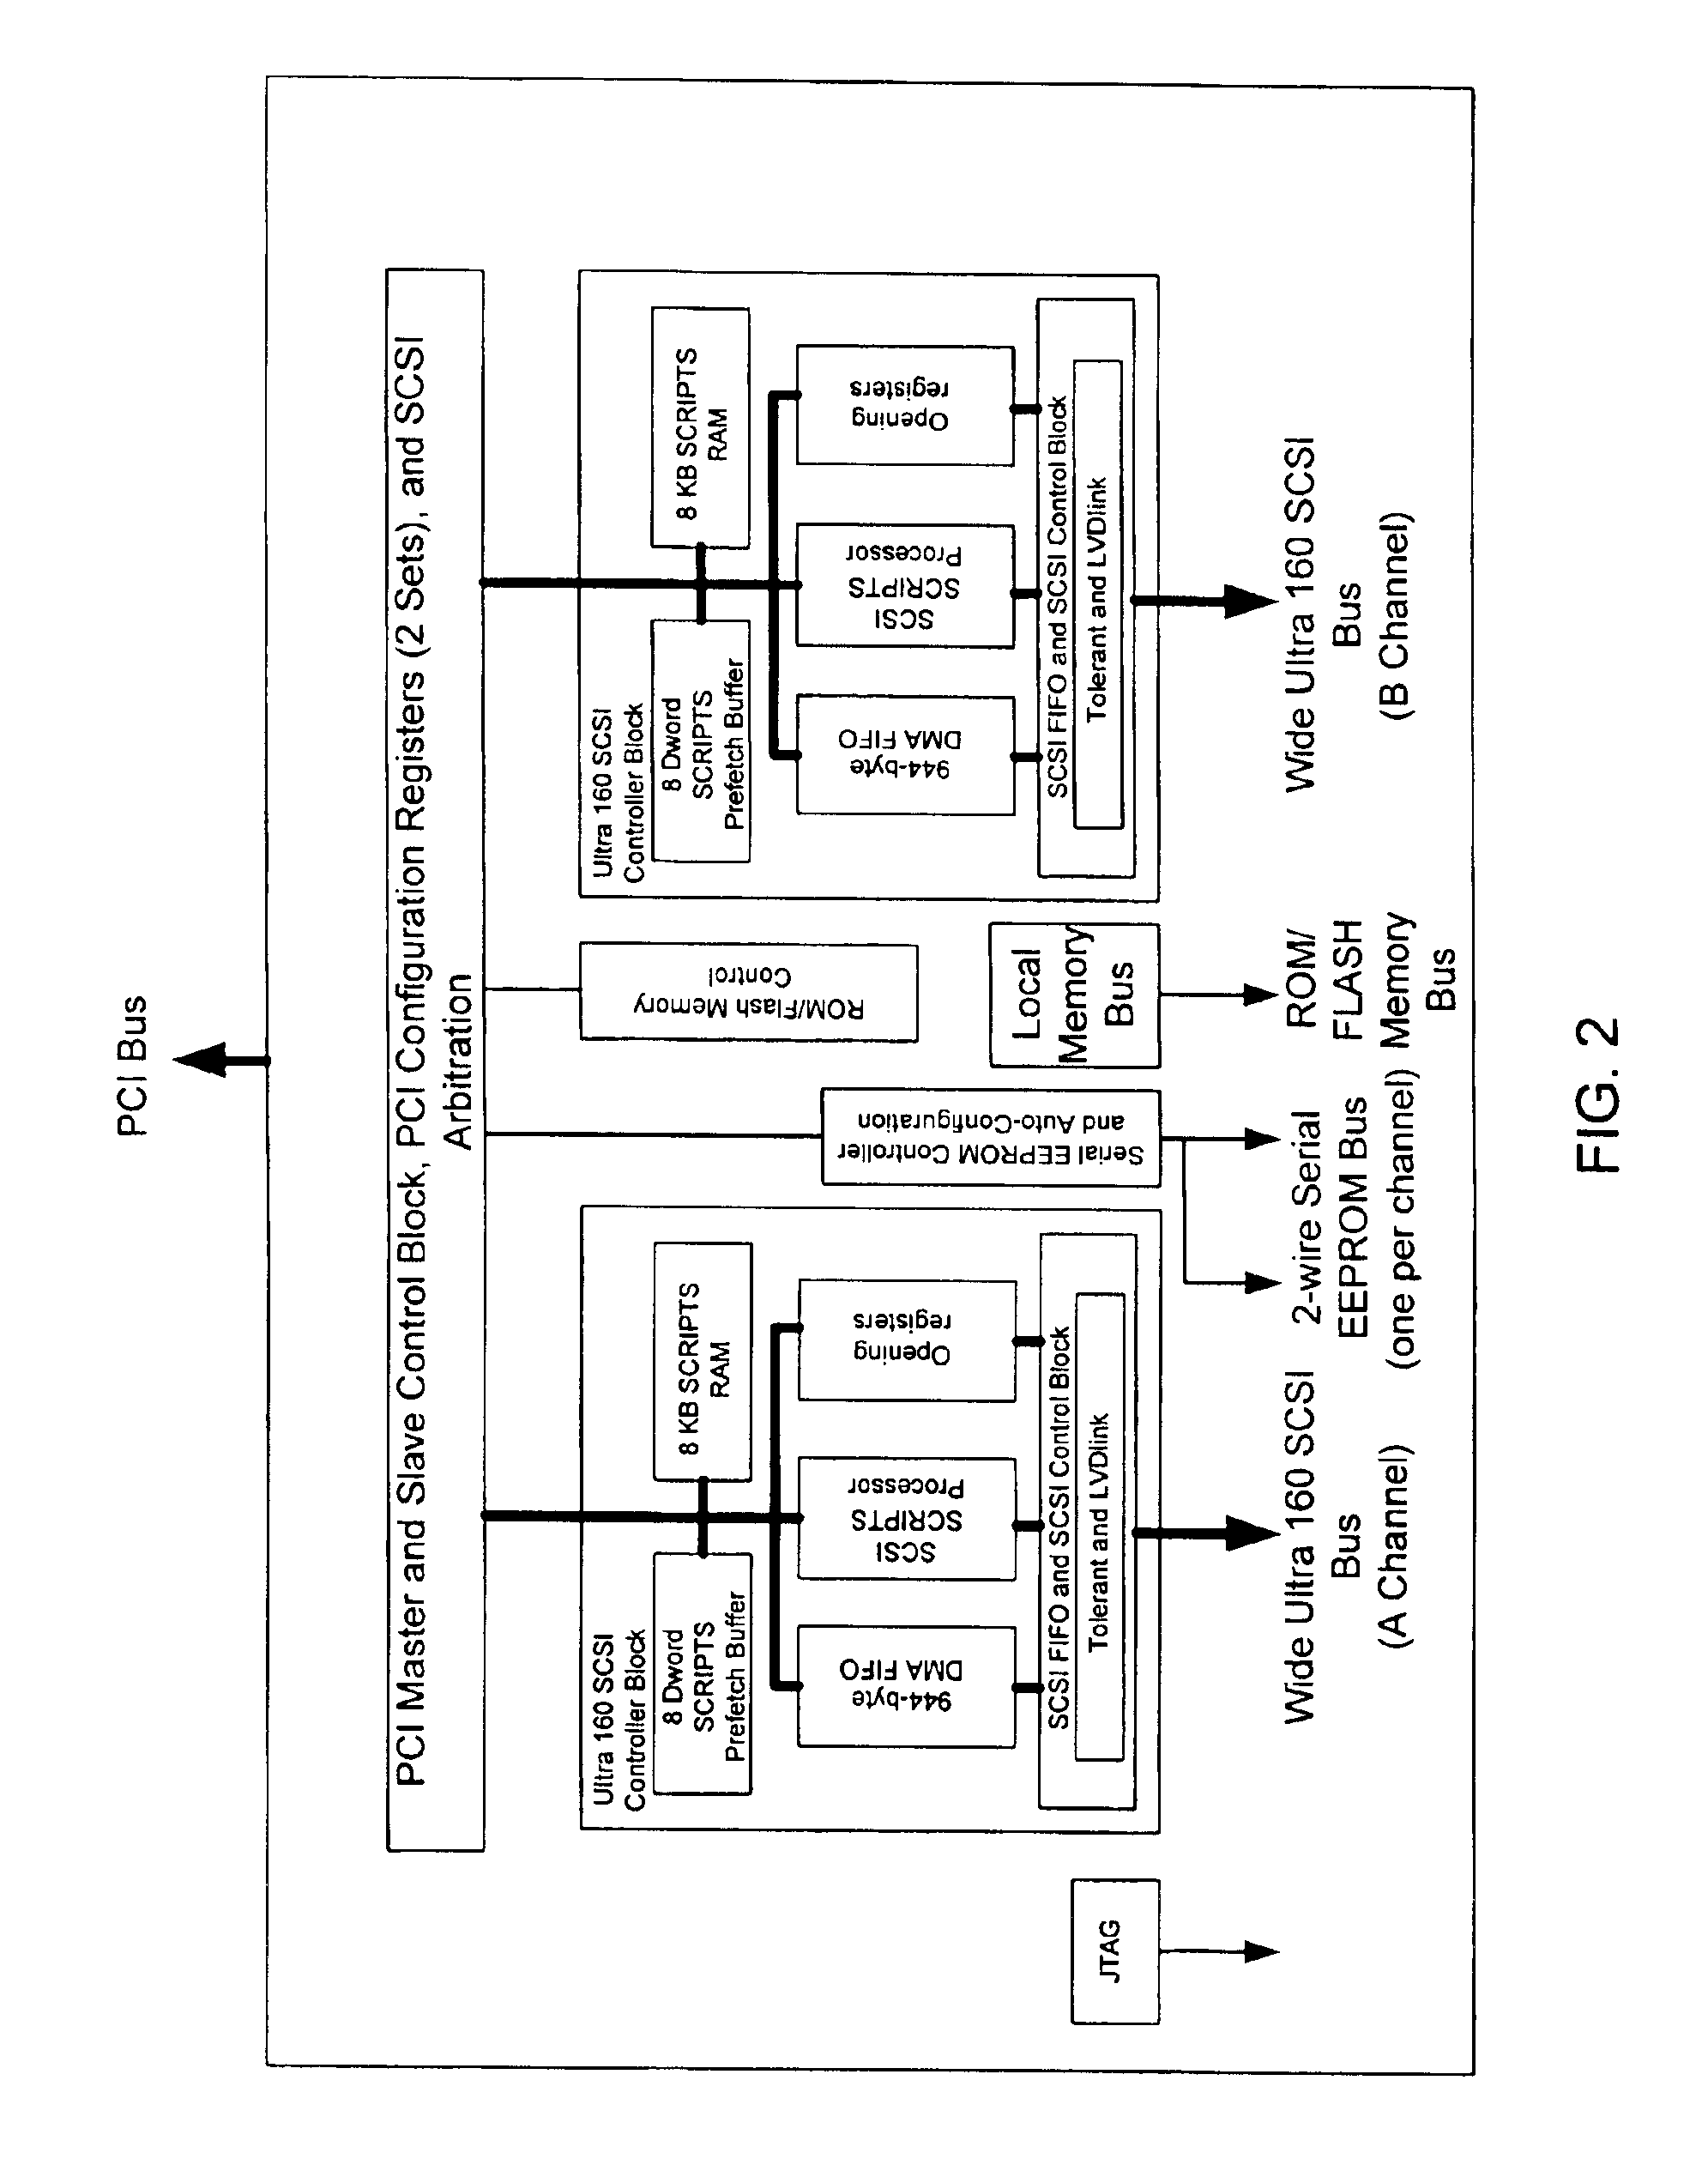 Data storage and retrieval system and method